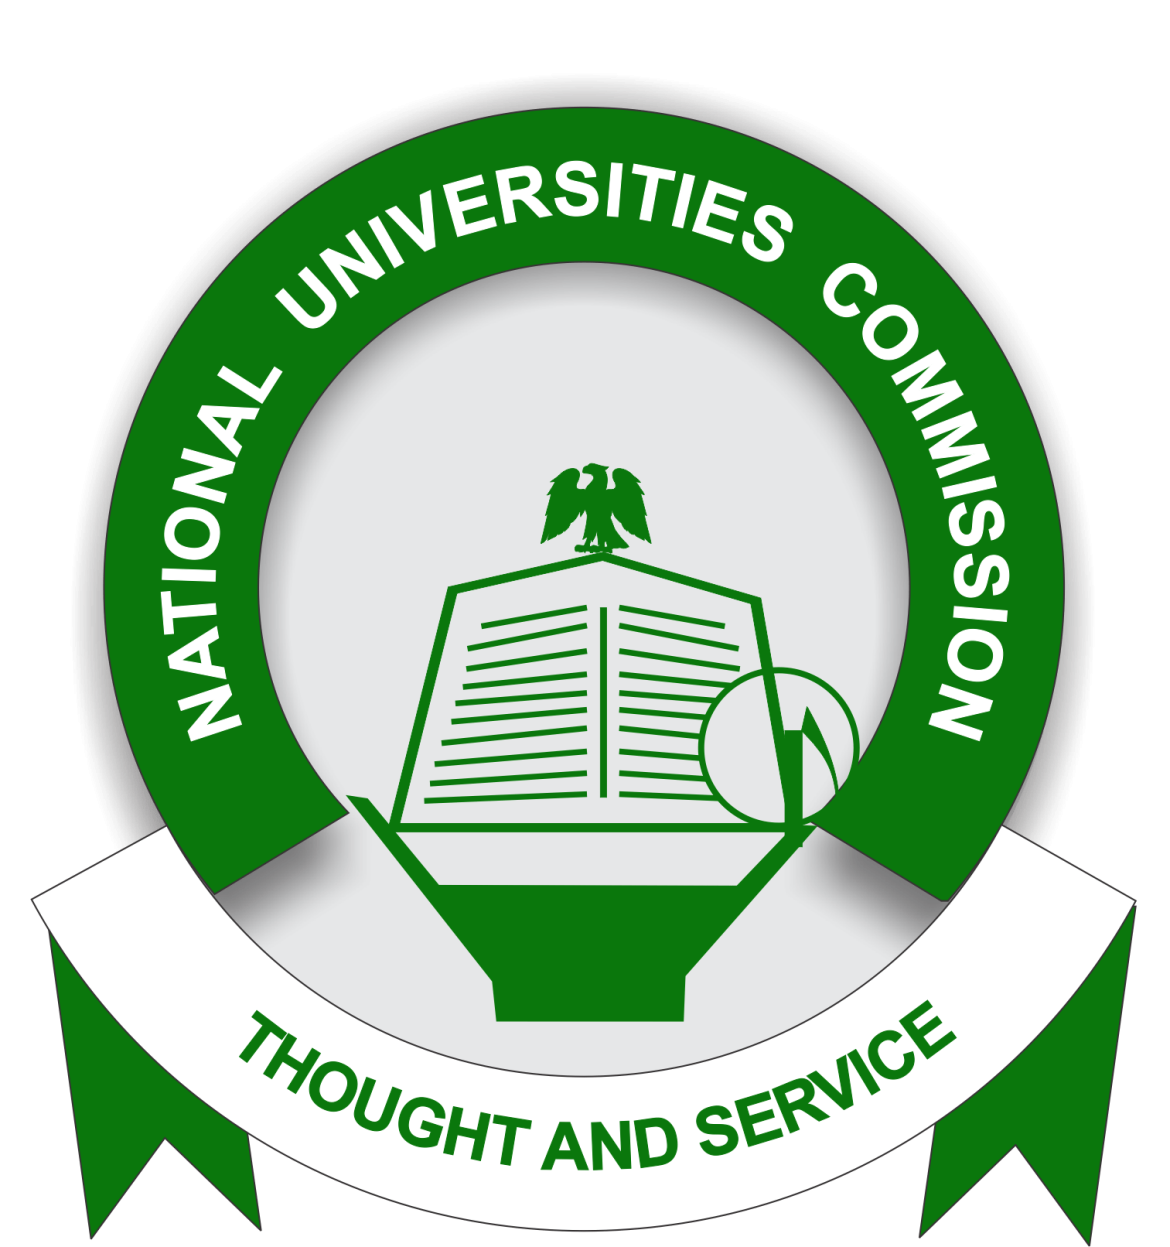 NUC Calls For Partnership Among Institutions Globally To Equip Students For Employment